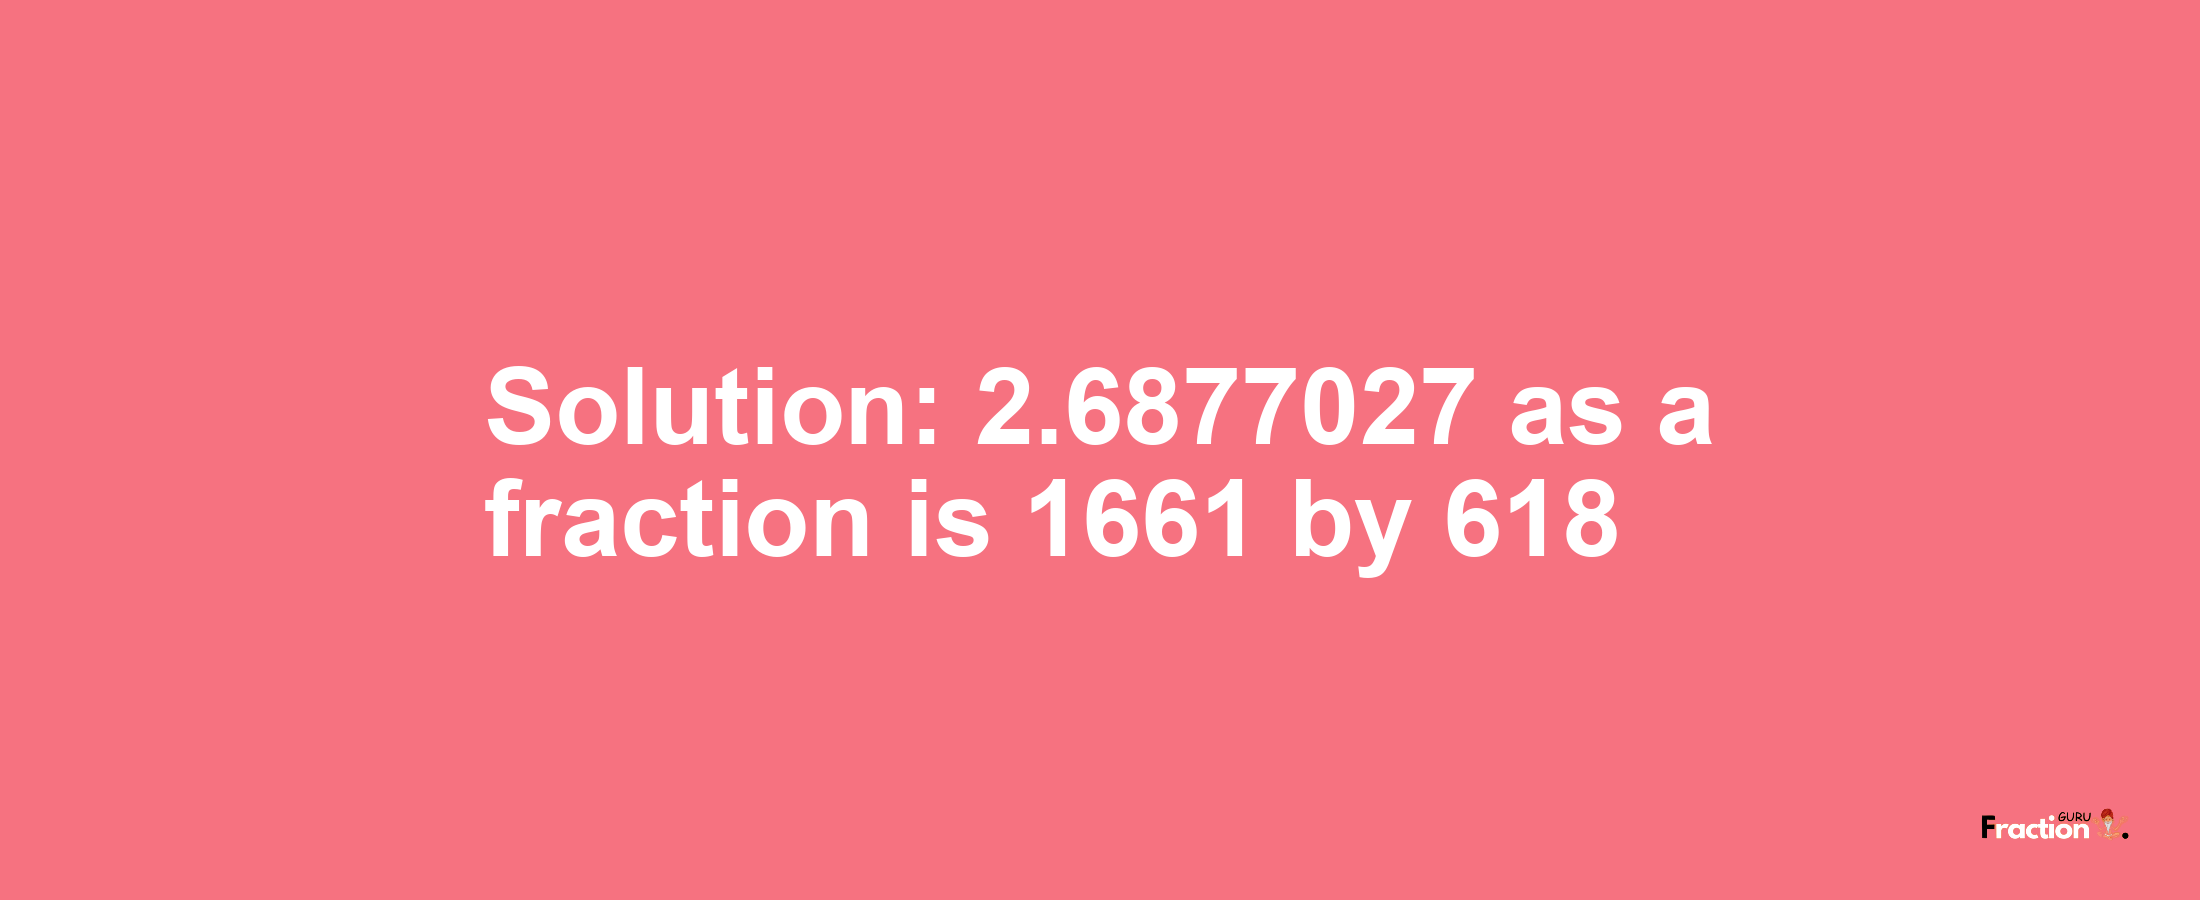 Solution:2.6877027 as a fraction is 1661/618